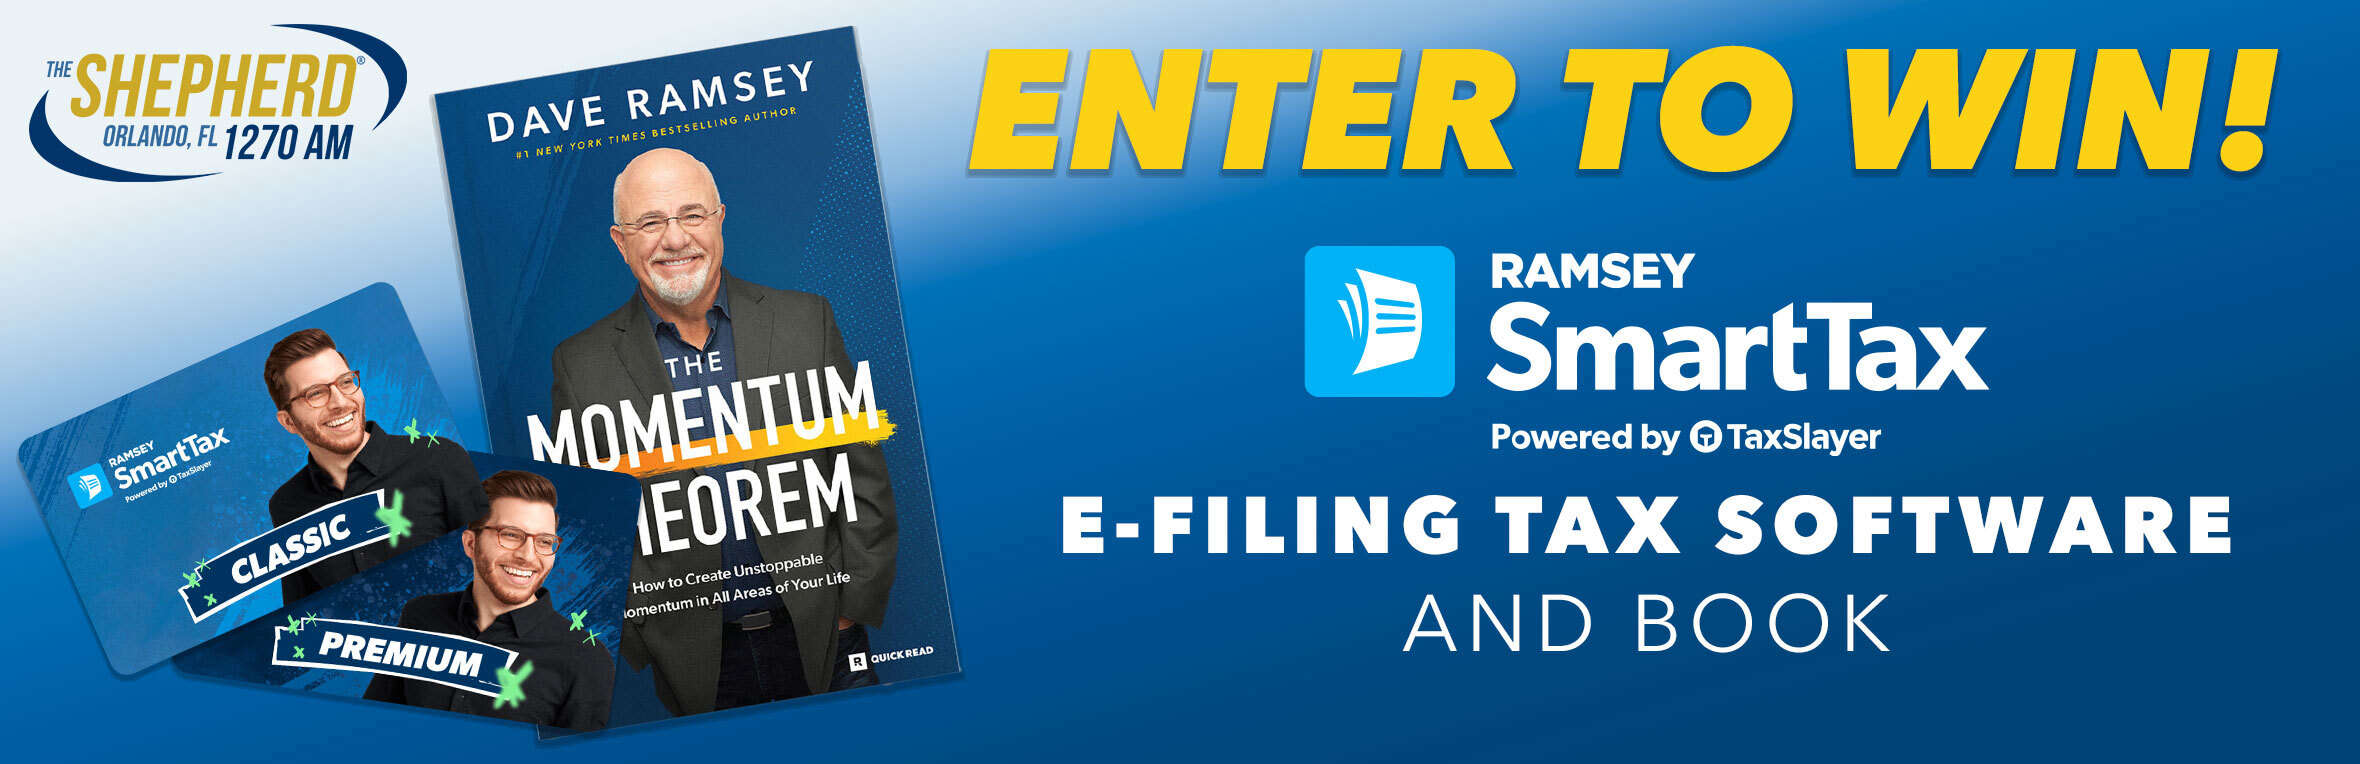 Enter to win The Shepherd and Dave Ramsey giveaway